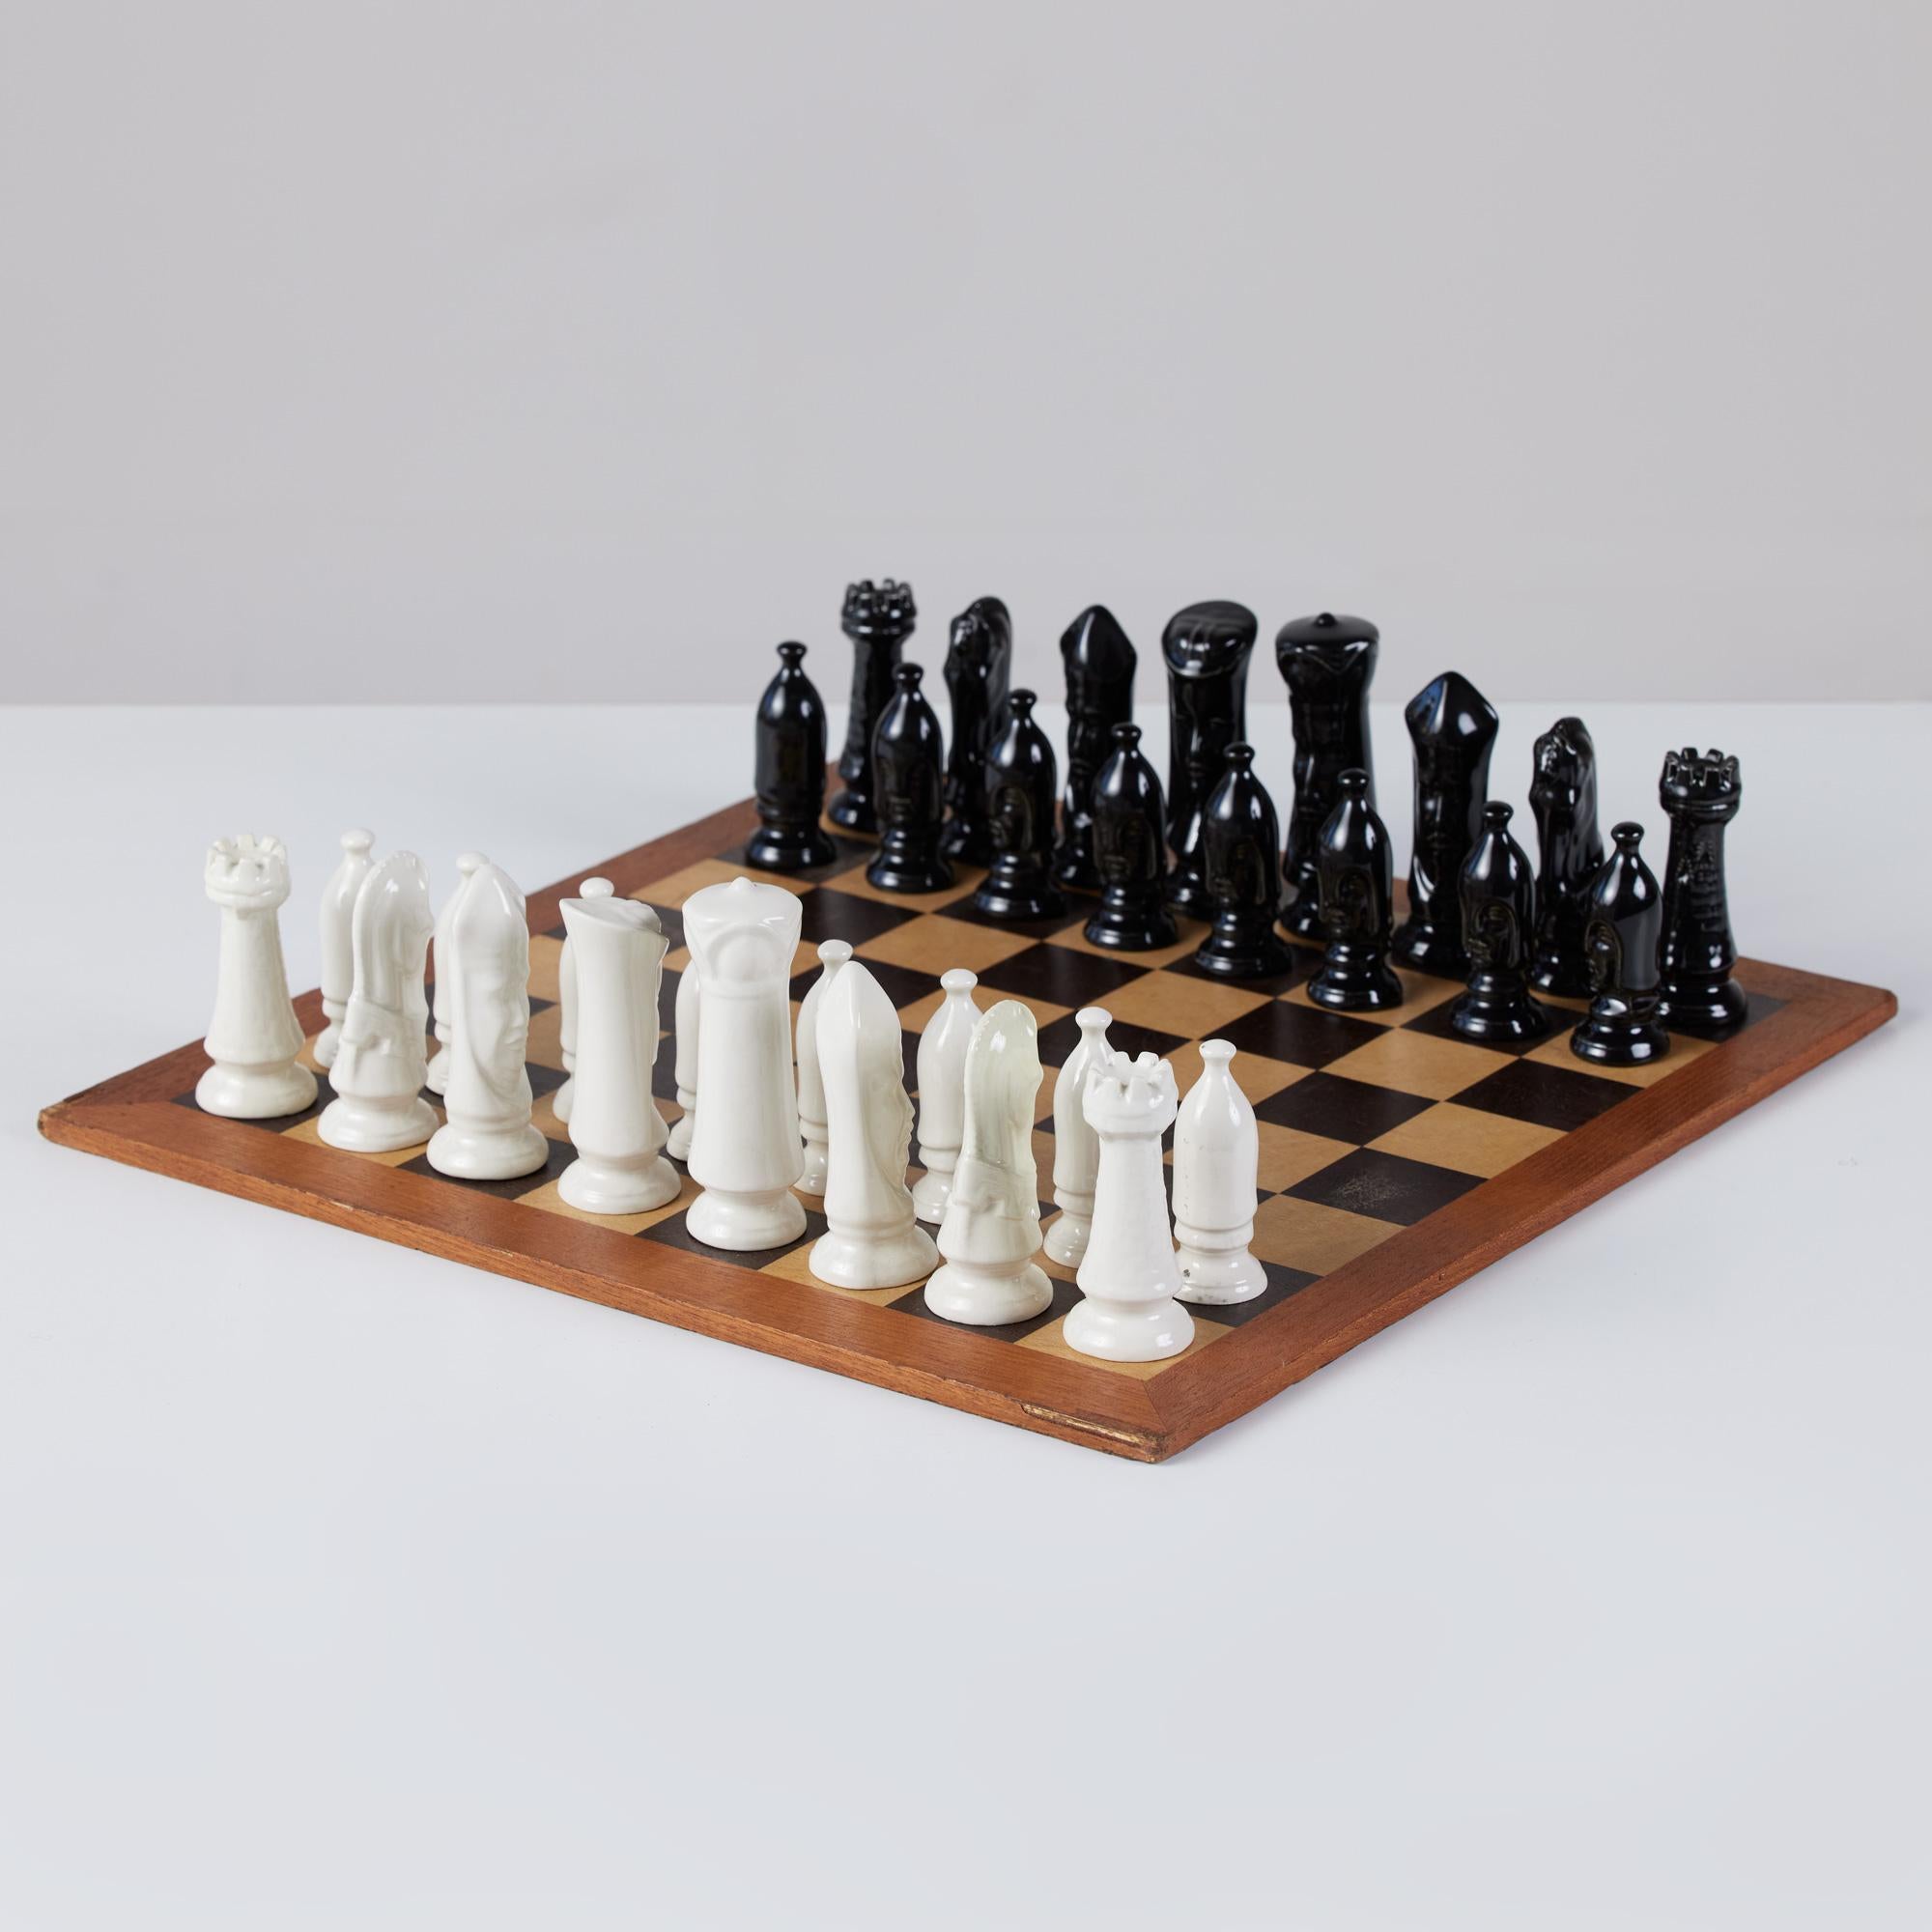 This stunning set features a black and tan wood checkerboard with walnut trim. It is paired with hand made ceramic glazed black and ivory chess pieces.

Dimensions
Board: 16” width x 16” depth x .25” height.

Chess pieces: 4